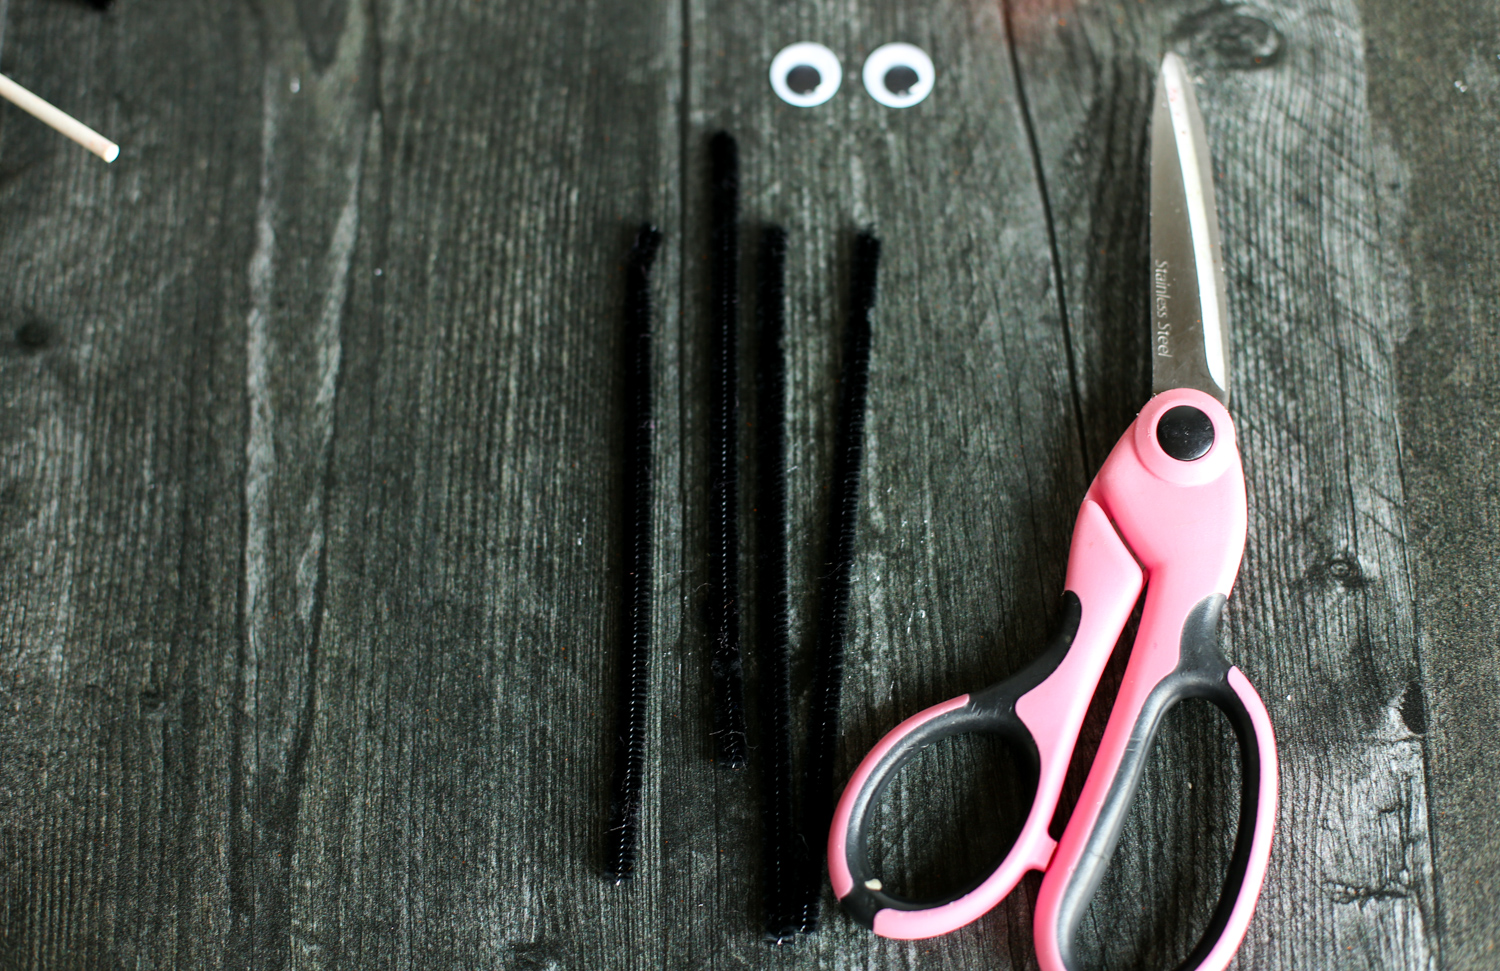 Black pipe cleaners cut in half, googly eyes, and a pair of scissors laid out on a wooden table.